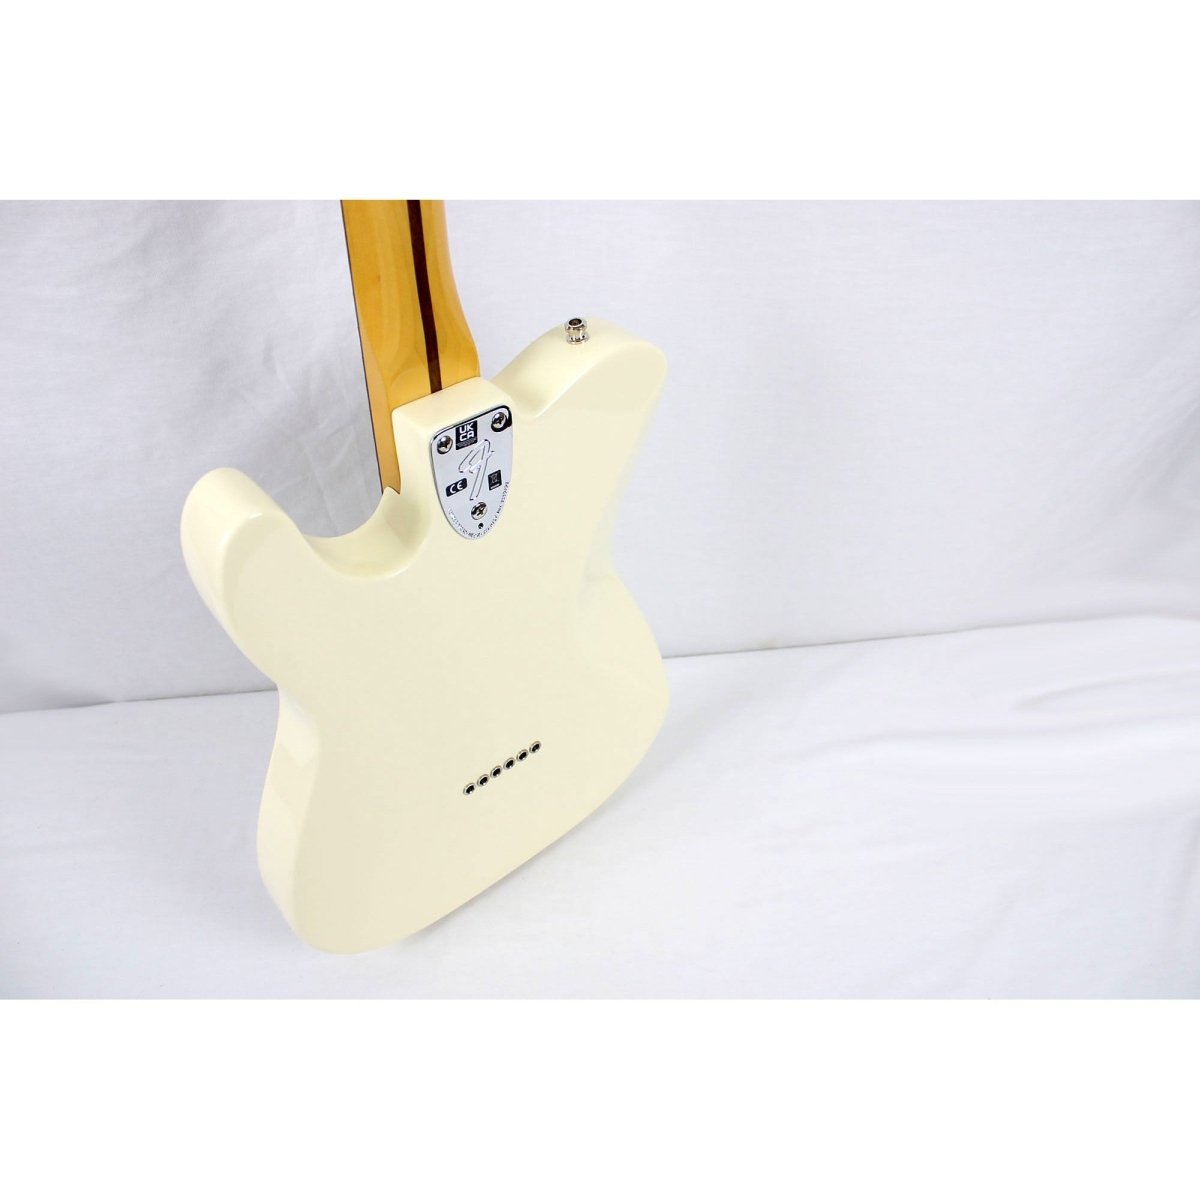 2022 Fender Limited-Edition American Vintage II 1977 Telecaster Custom - Olympic White | w/ OHSC **USED - EXCELLENT** - Leitz Music-717669967154-VS221181